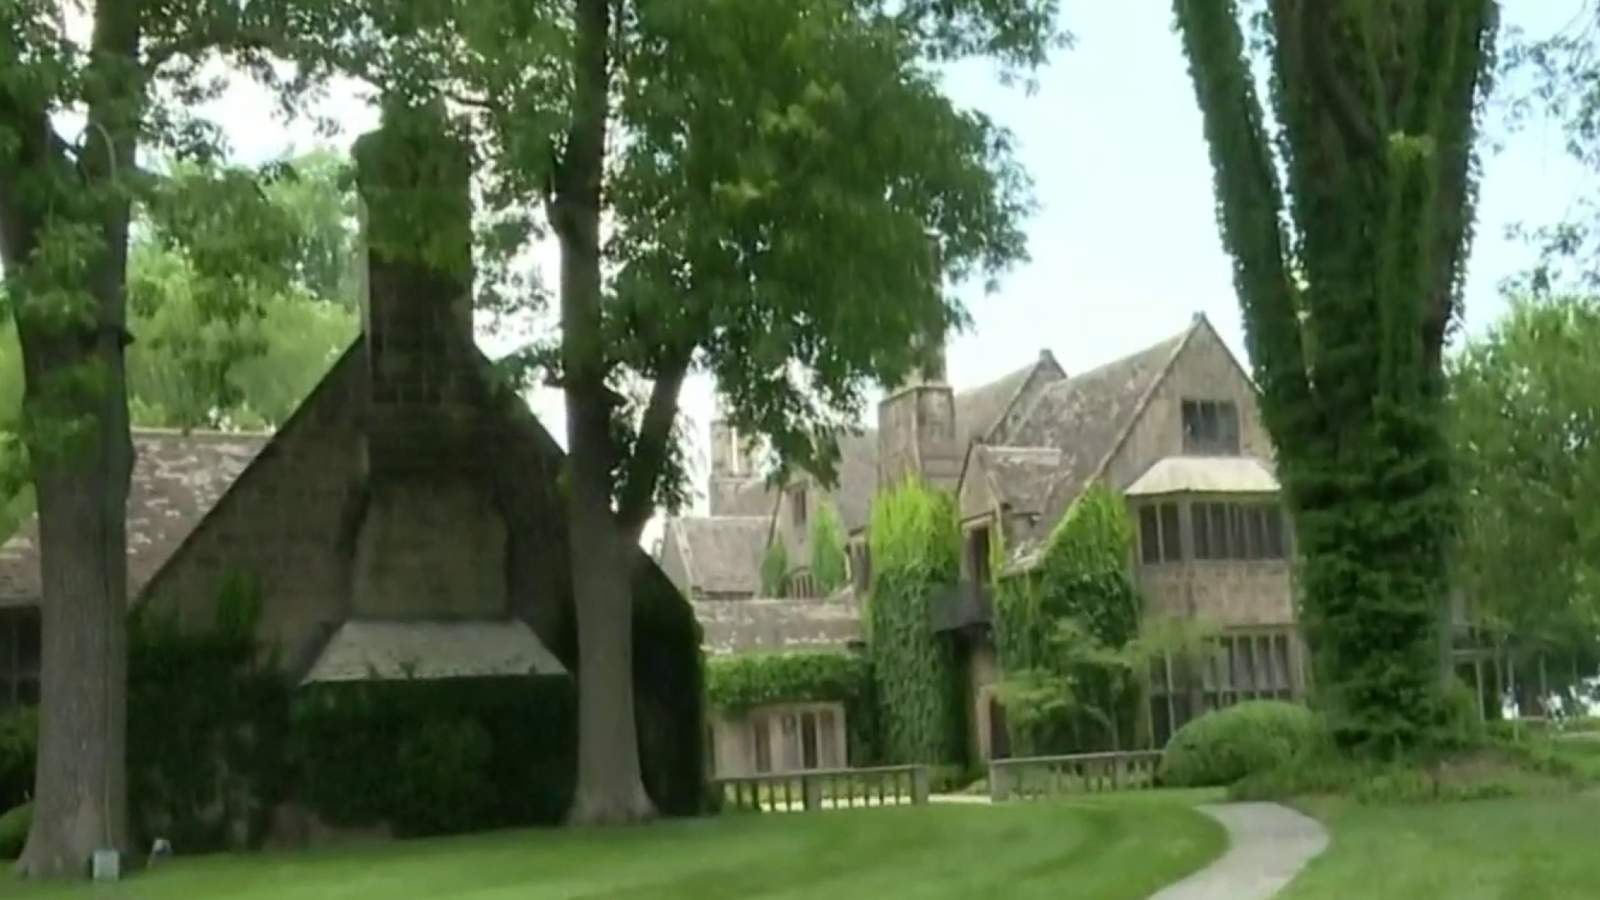 Take a walk around The Edsel and Eleanor Ford House